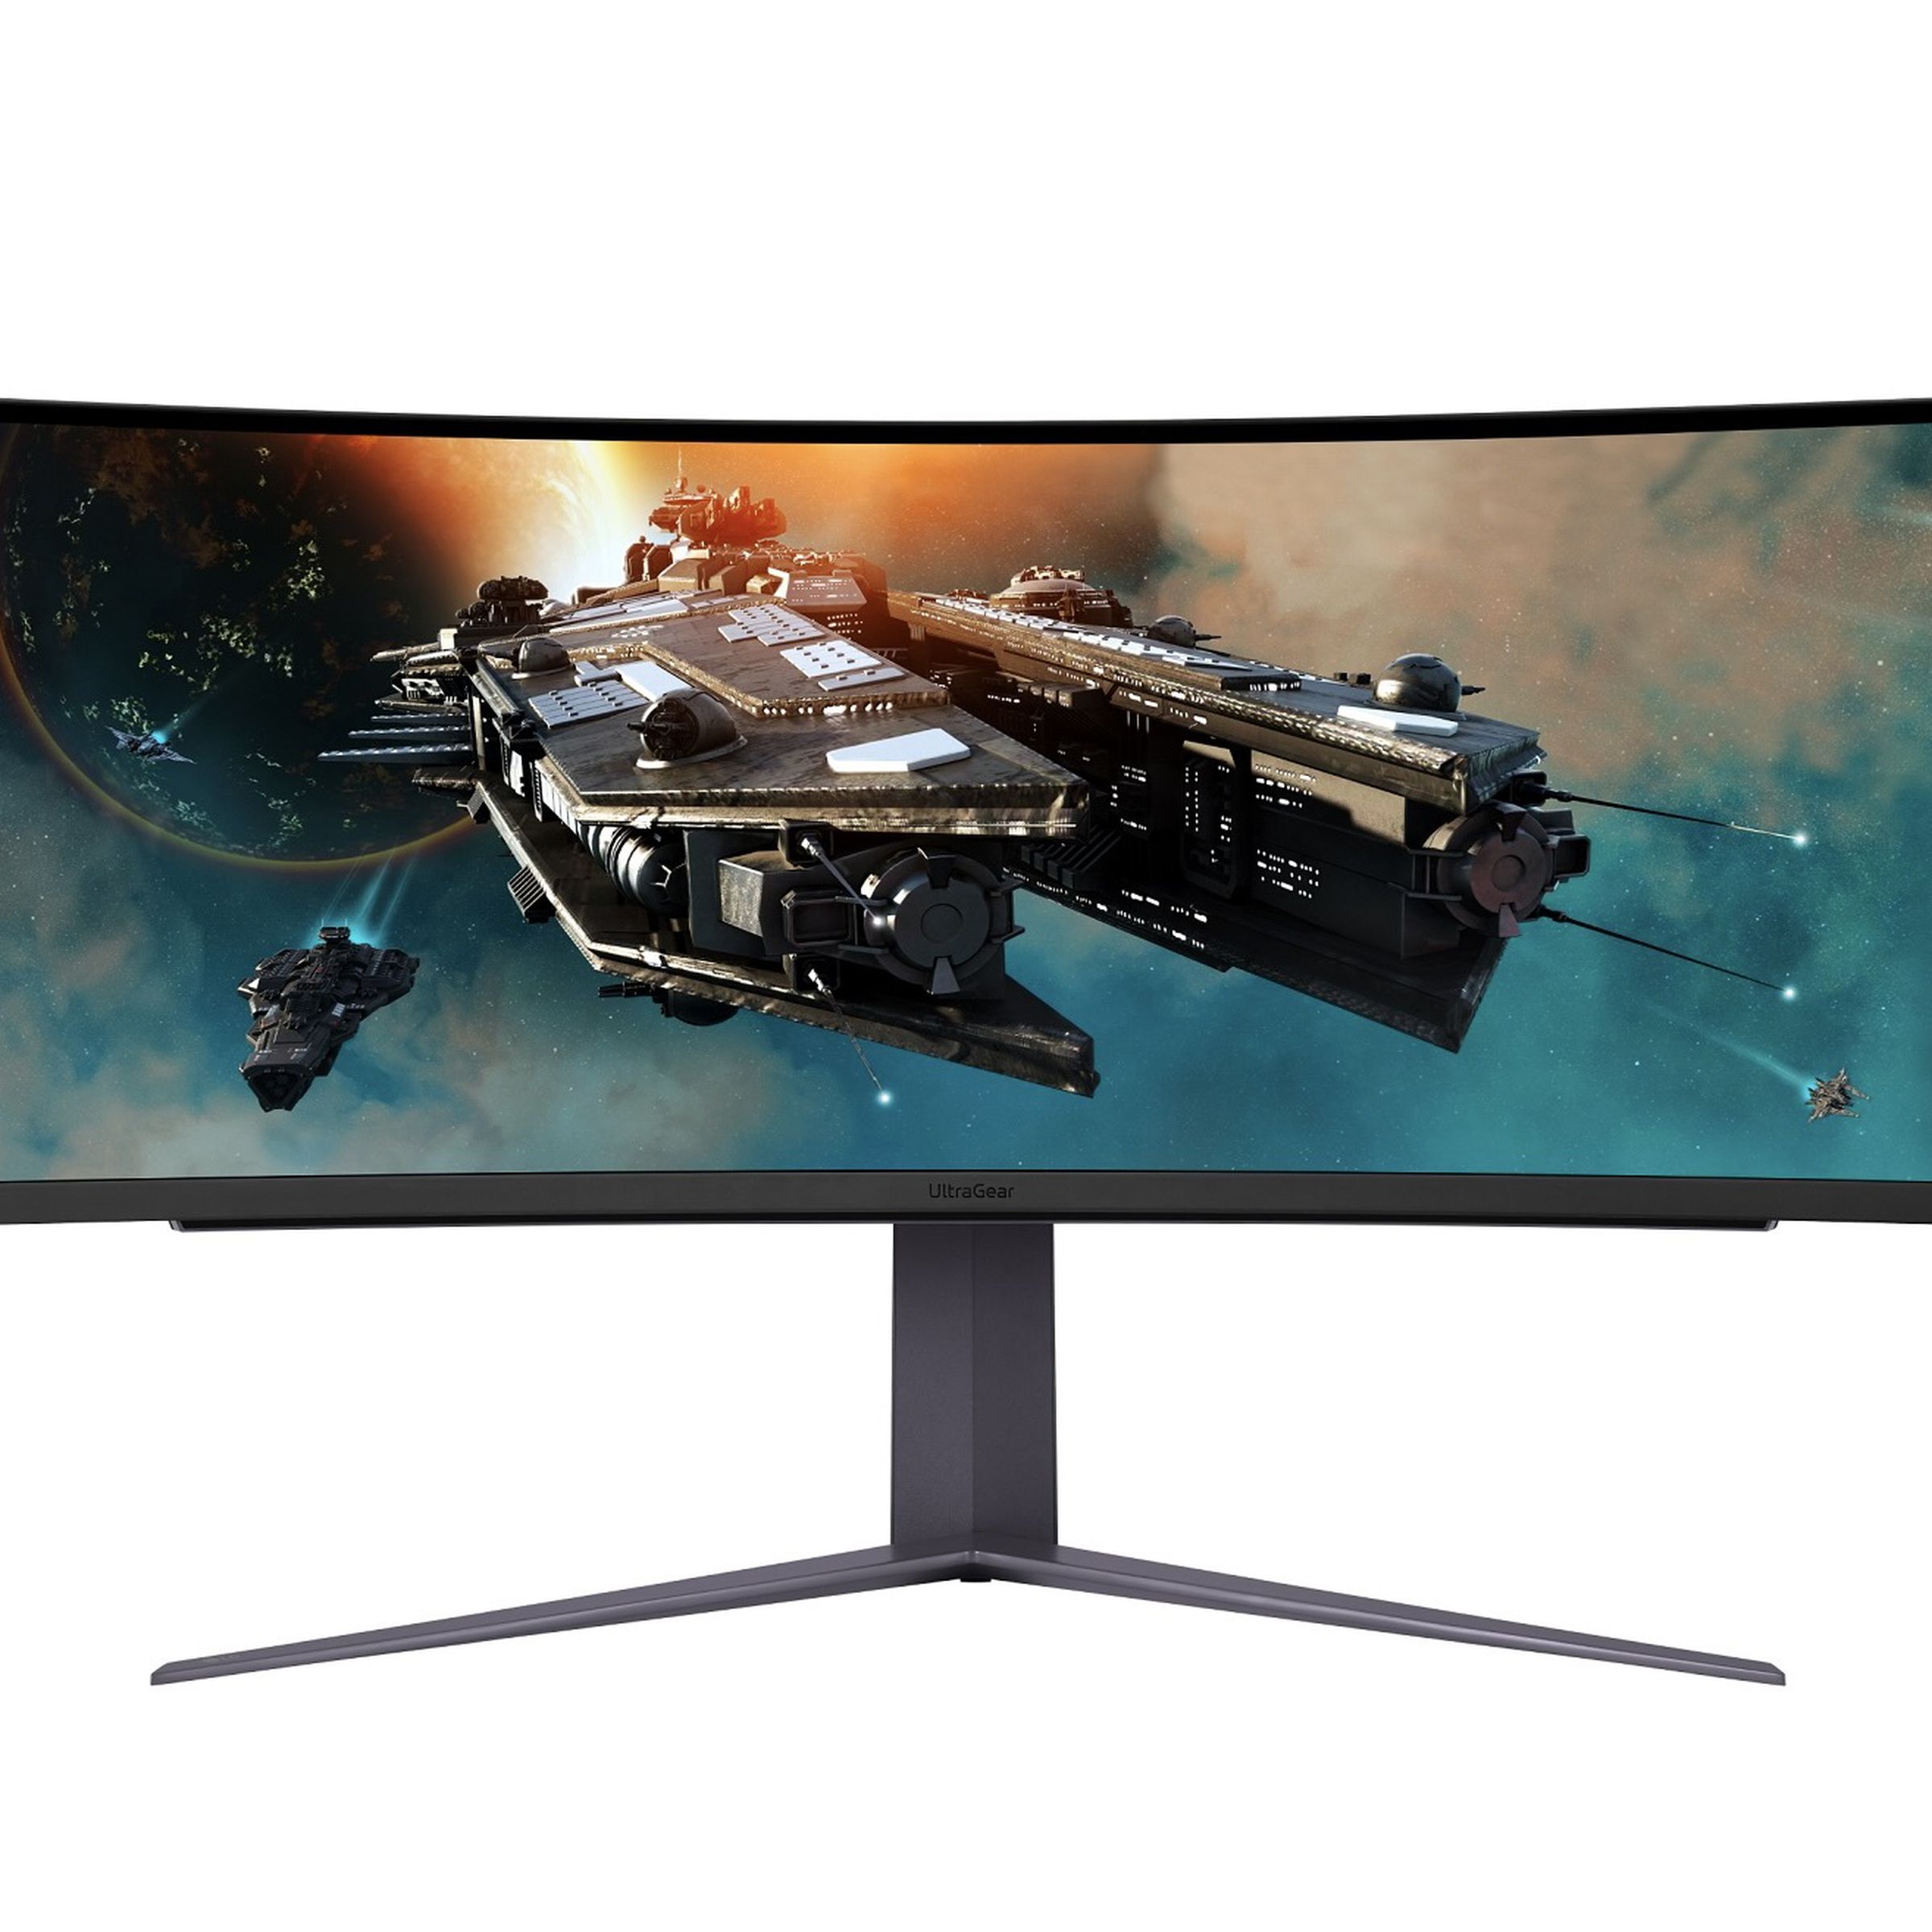 LG ultragear 49-inch curved monitor has a V shaped stand and an off-set chin with a shiny “ultragear” etching